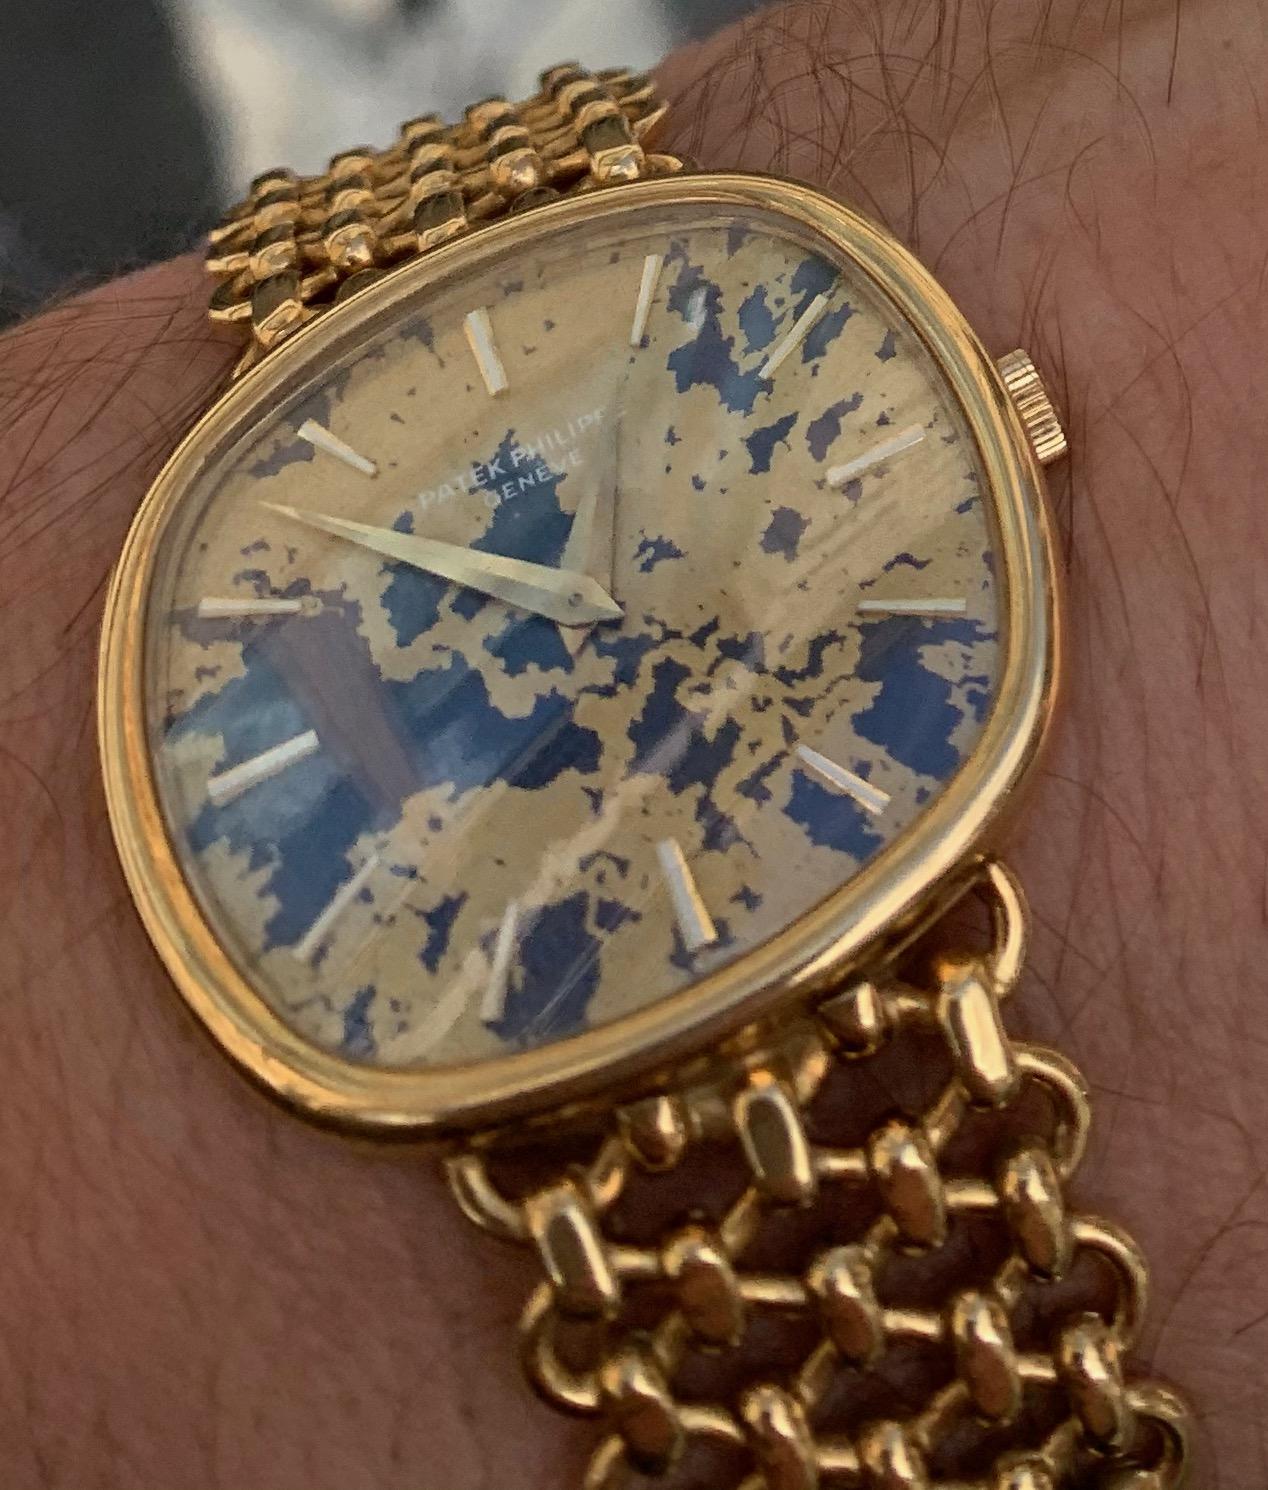 Unique Patek Philippe 3844 with Amazing Worldmap Dial / 4. of july ! For Sale 5